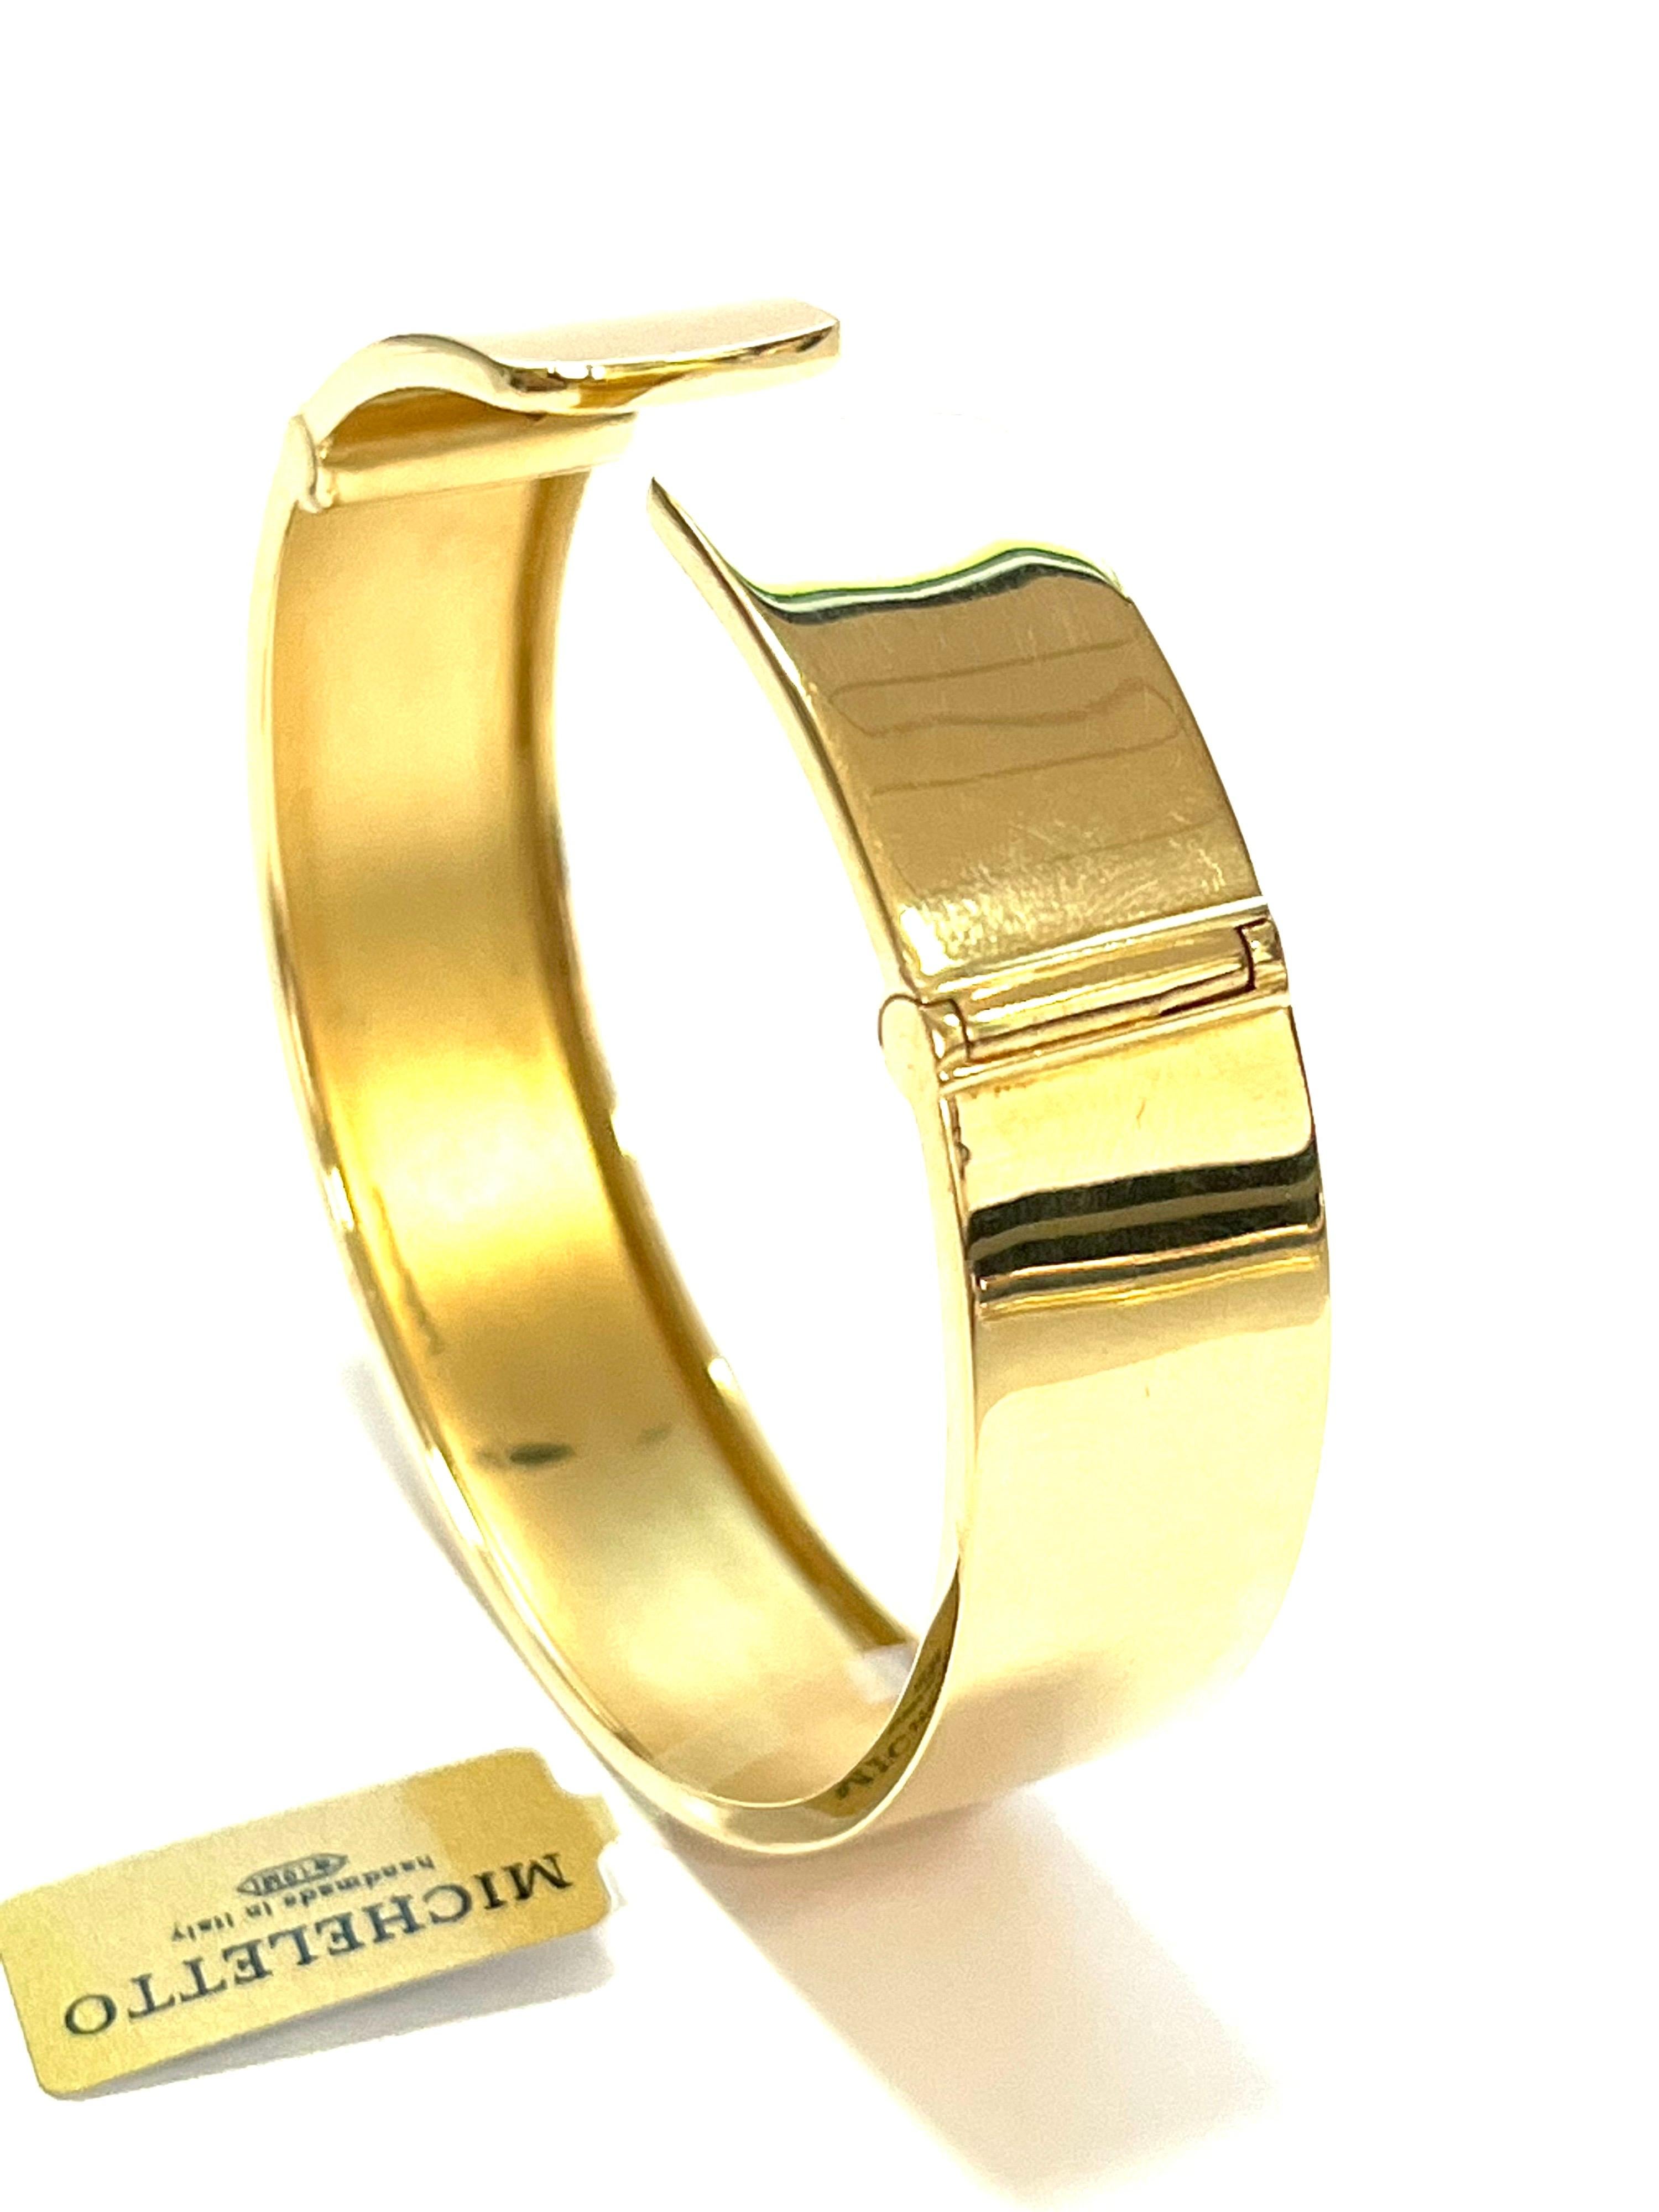 18 Karat Yellow Gold Plain Cuff Bracelet with two white gold springs that allow the bracelet to be worn comfortably.
Modern and clean desing.
Total Gold weight gr 29.1
Height cm.1.5
STAMP ITALY  10 MI  750

The necklace is also available code